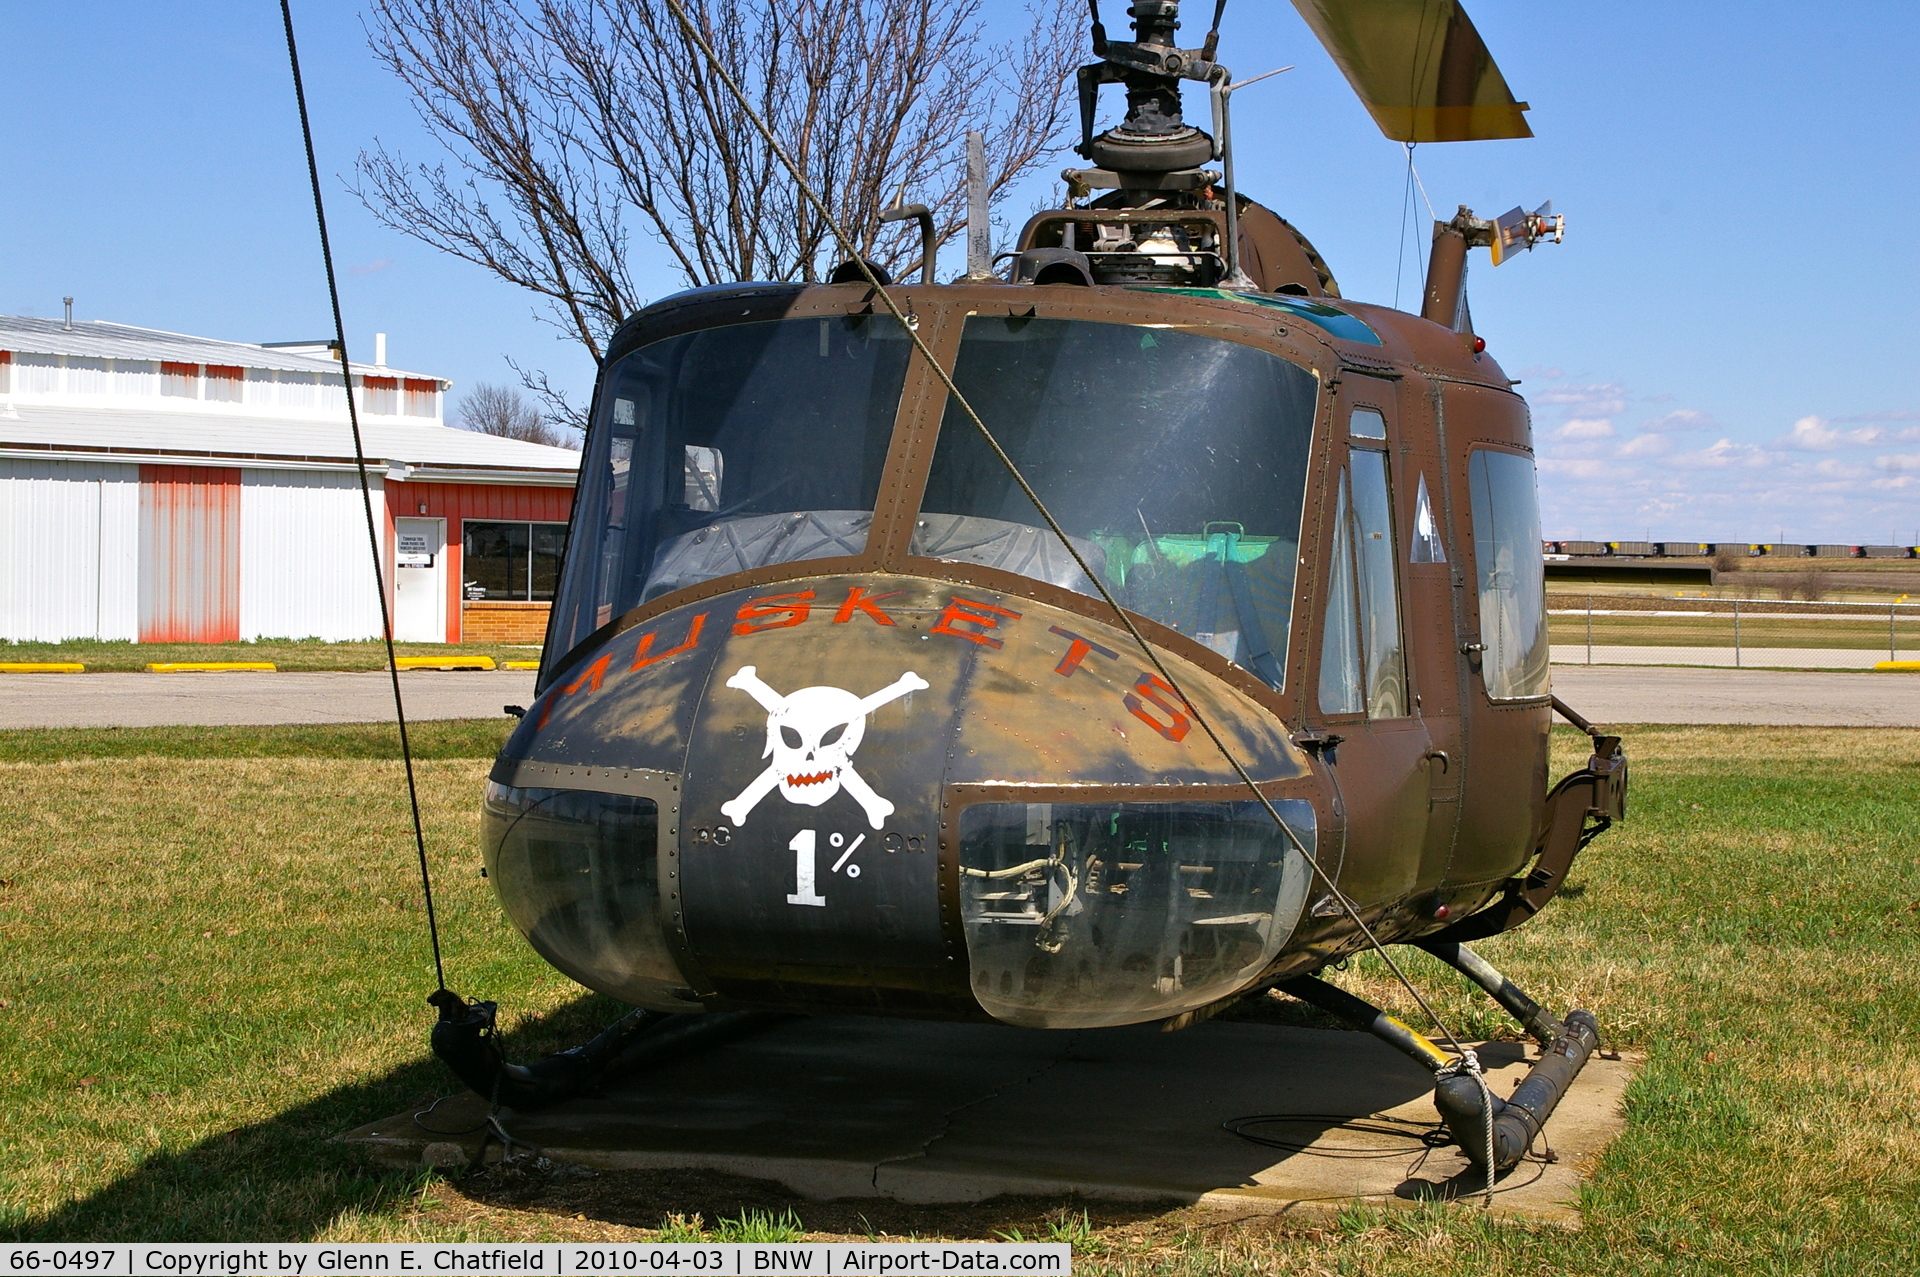 66-0497, 1966 Bell UH-1M Iroquois C/N 1479, Gate Guardian for main airport entrance